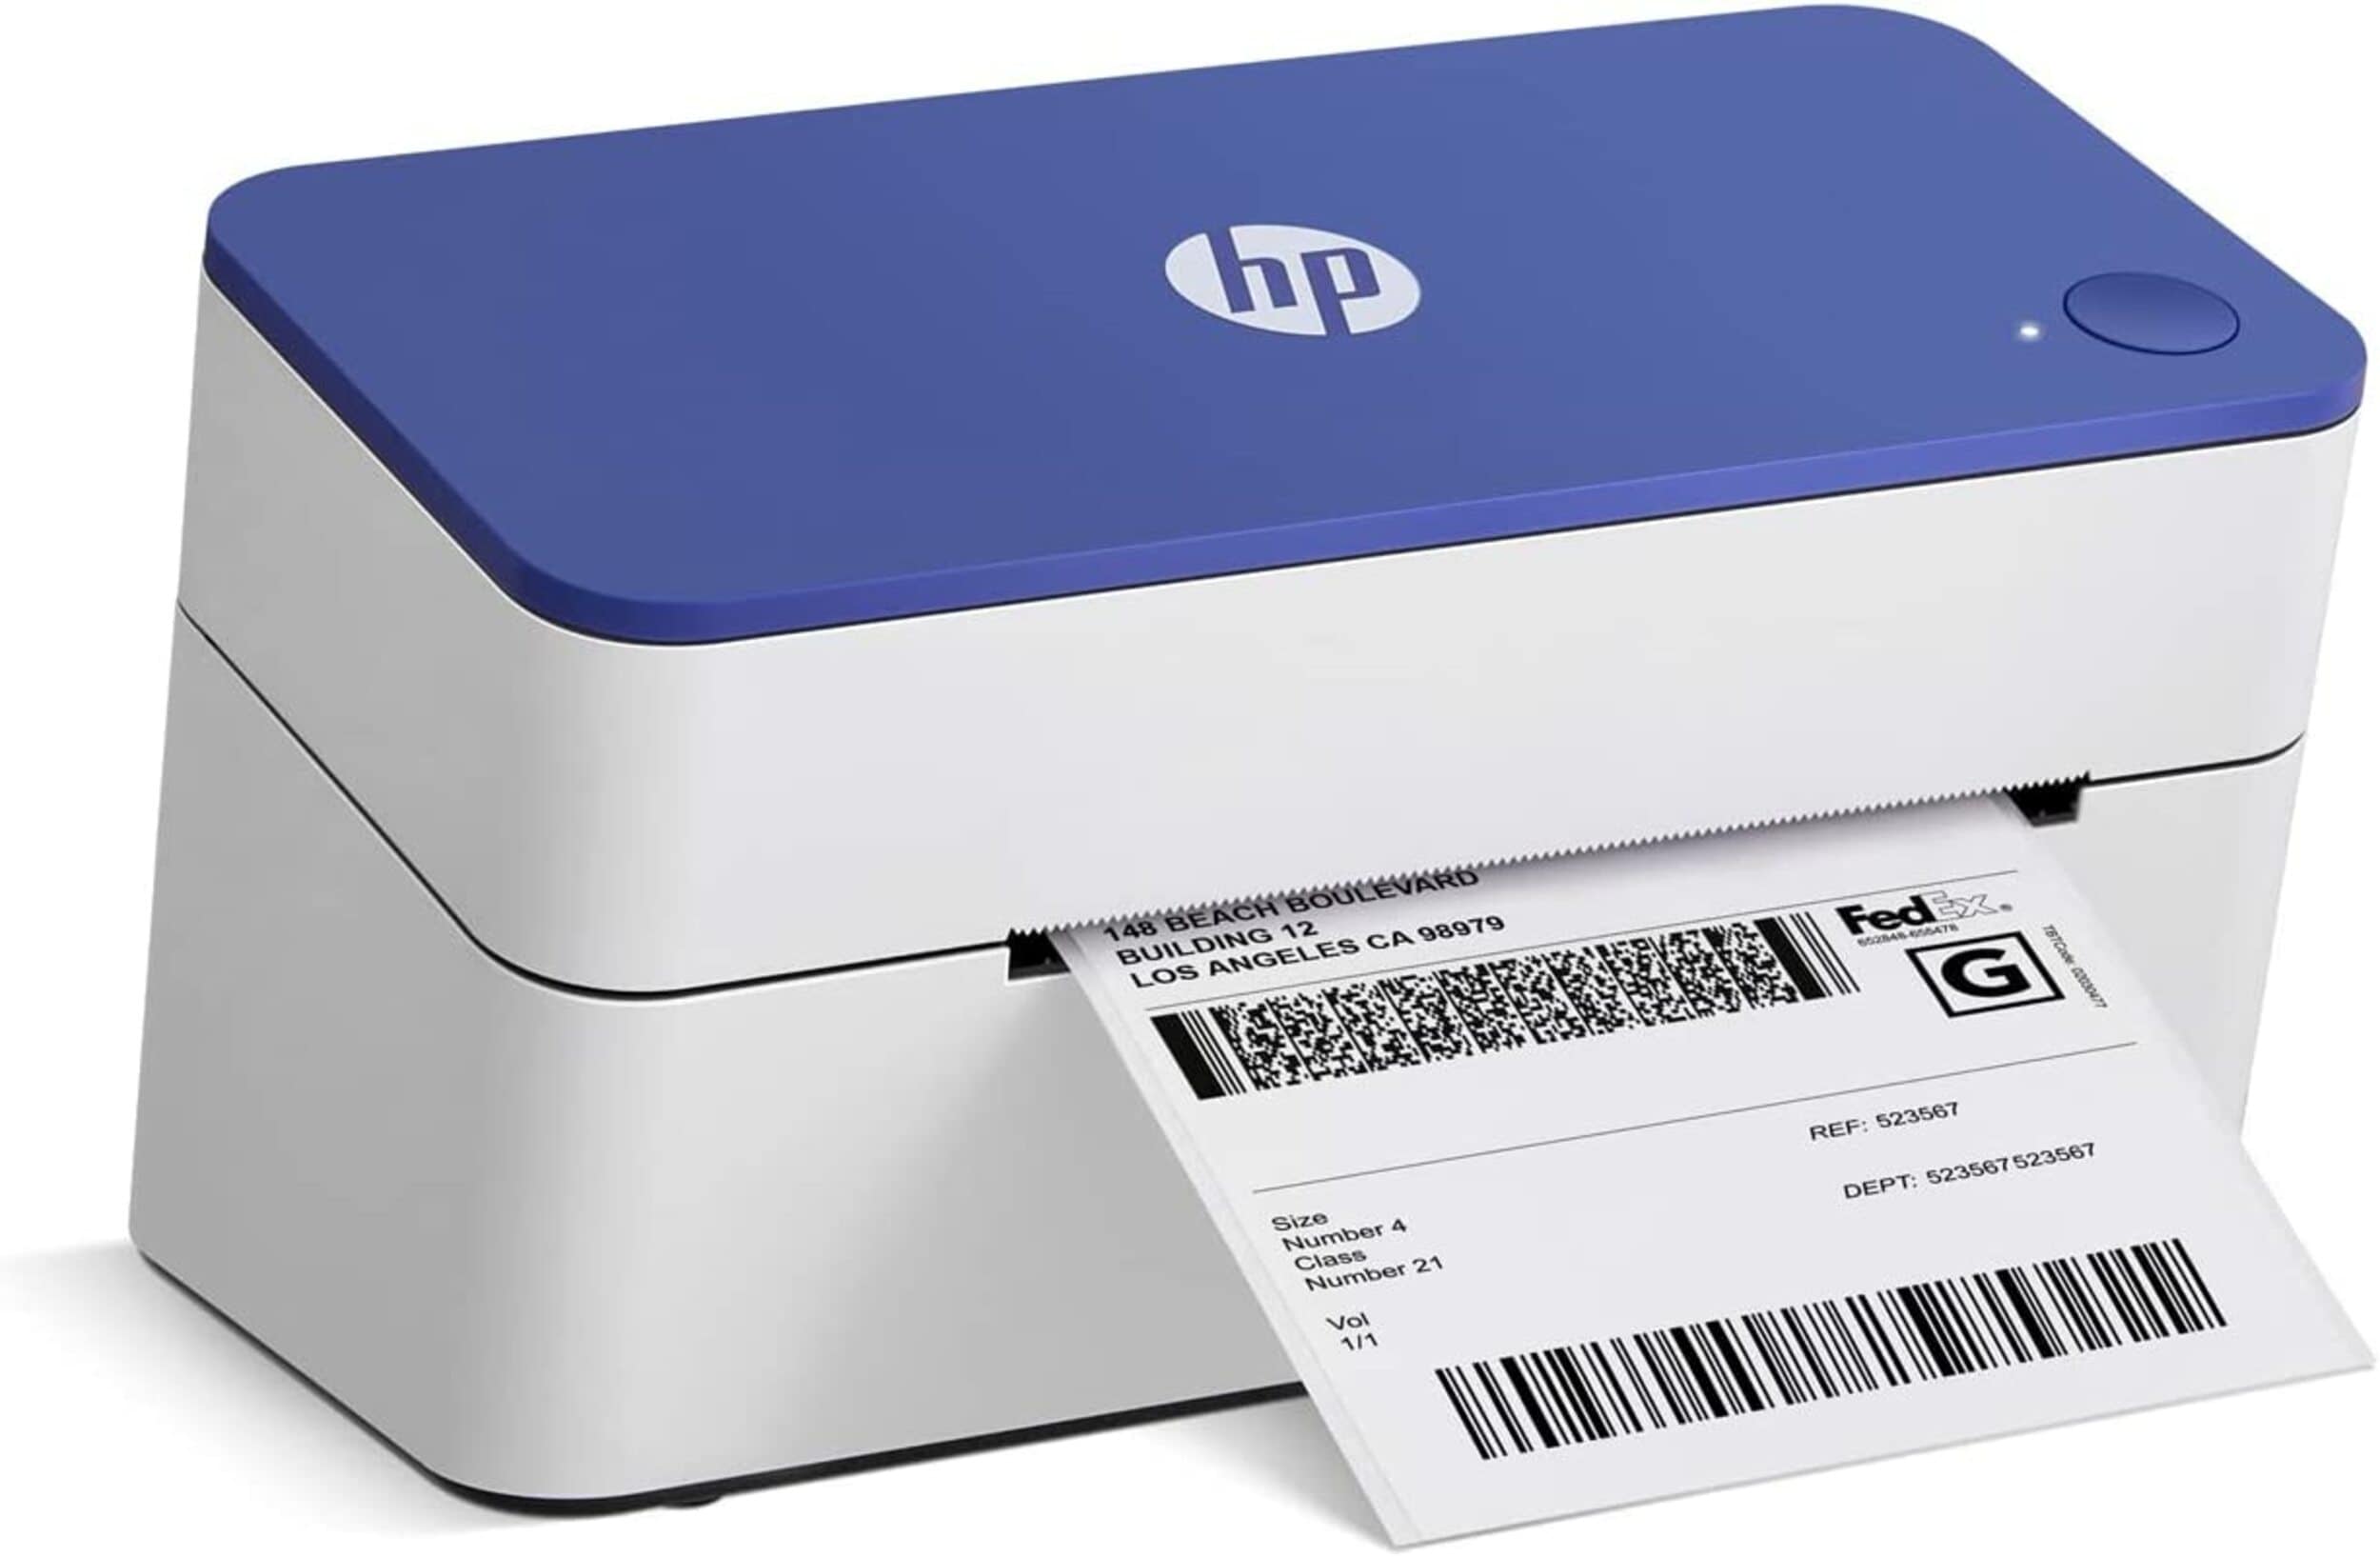 HP HP Shipping Label Printer, 4x6 Compact Thermal Label Printer, 203 DPI  Thermal Printer for Home Office in the Printers department at